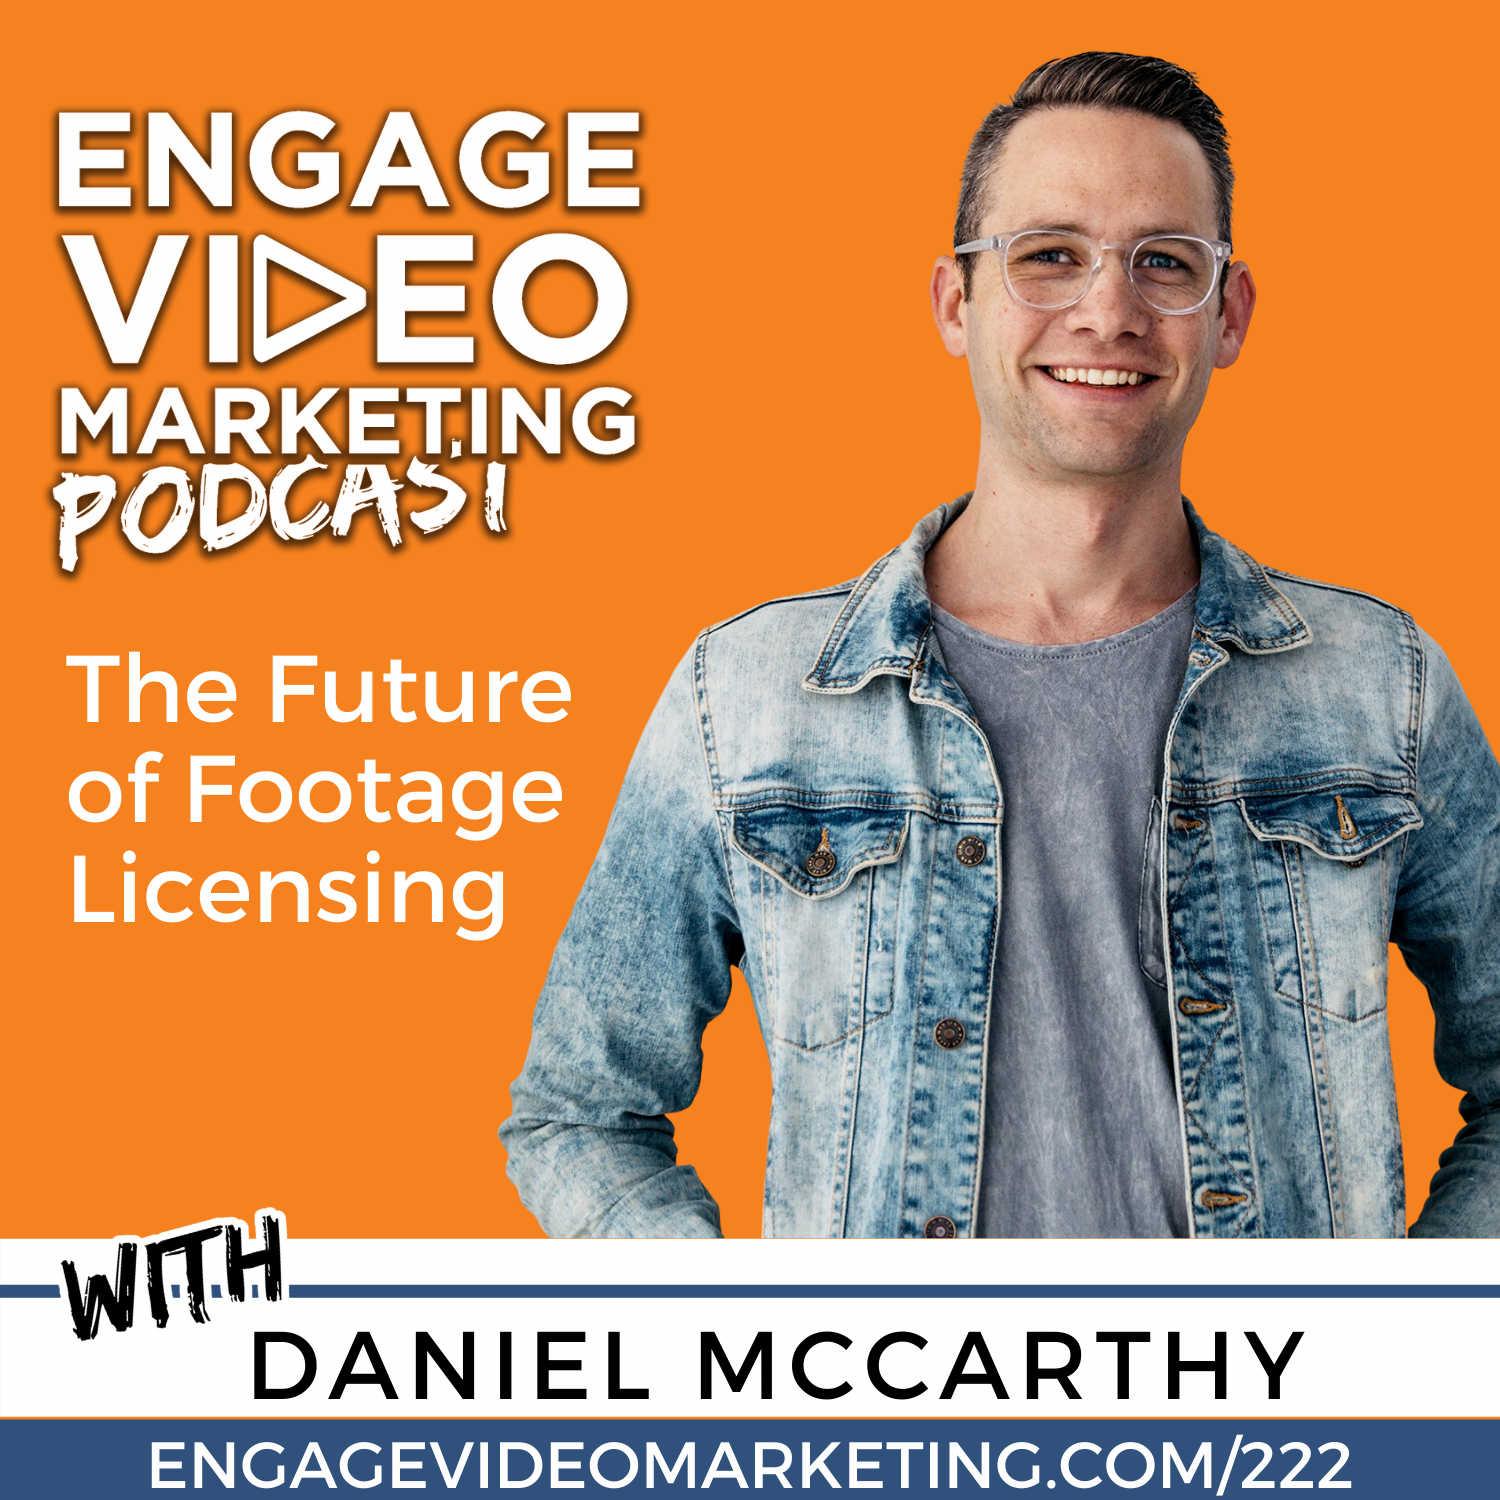 The Future of Footage Licensing with Daniel McCarthy